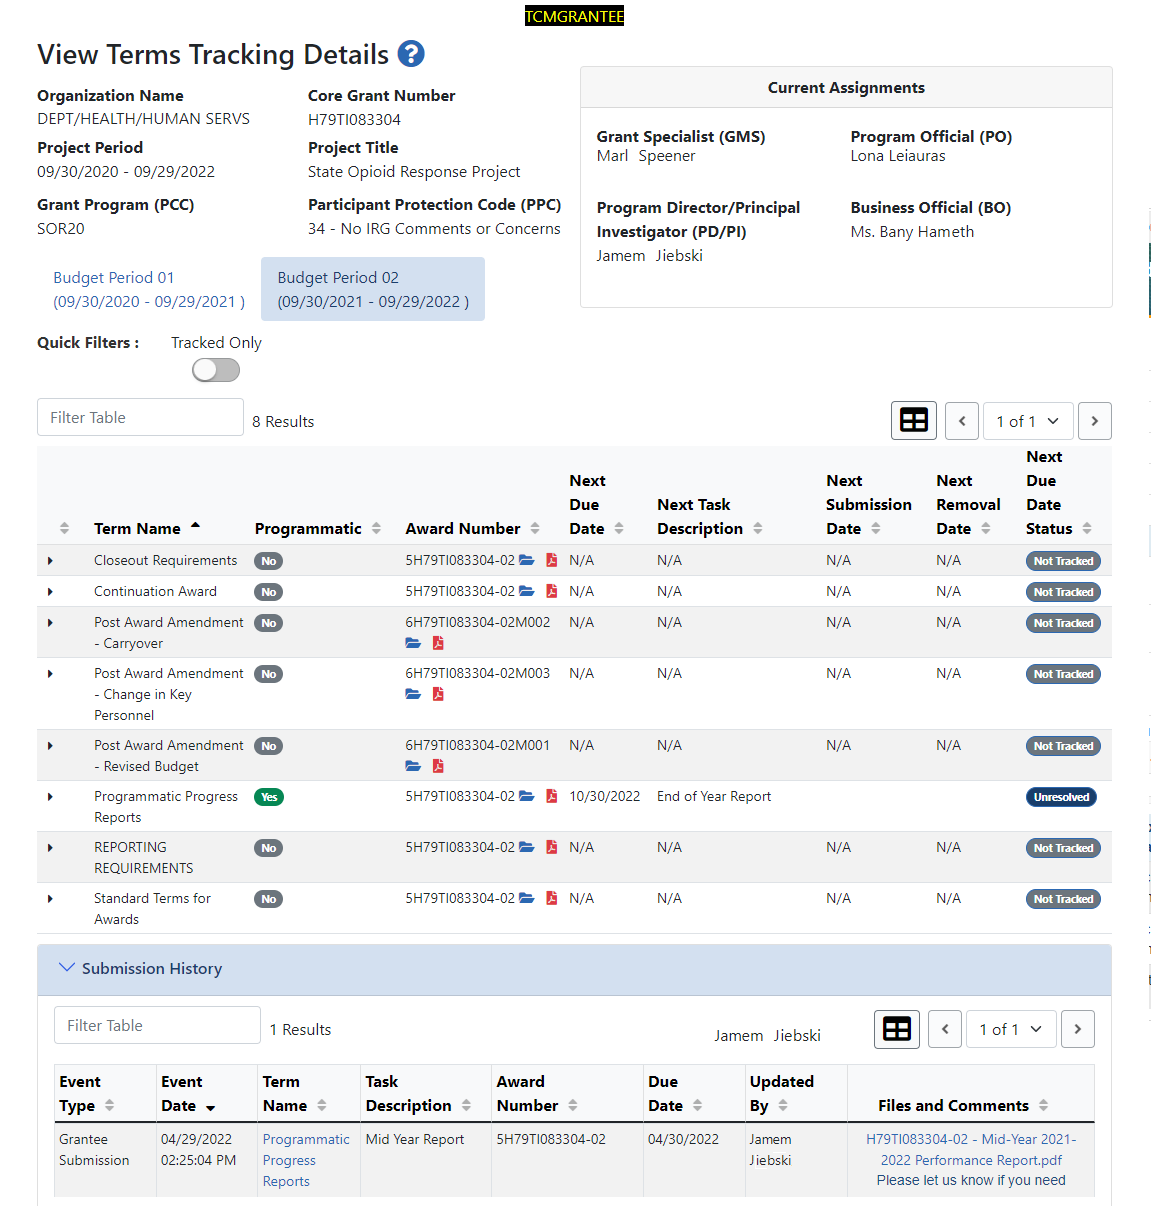 View Terms Tracking Details screen